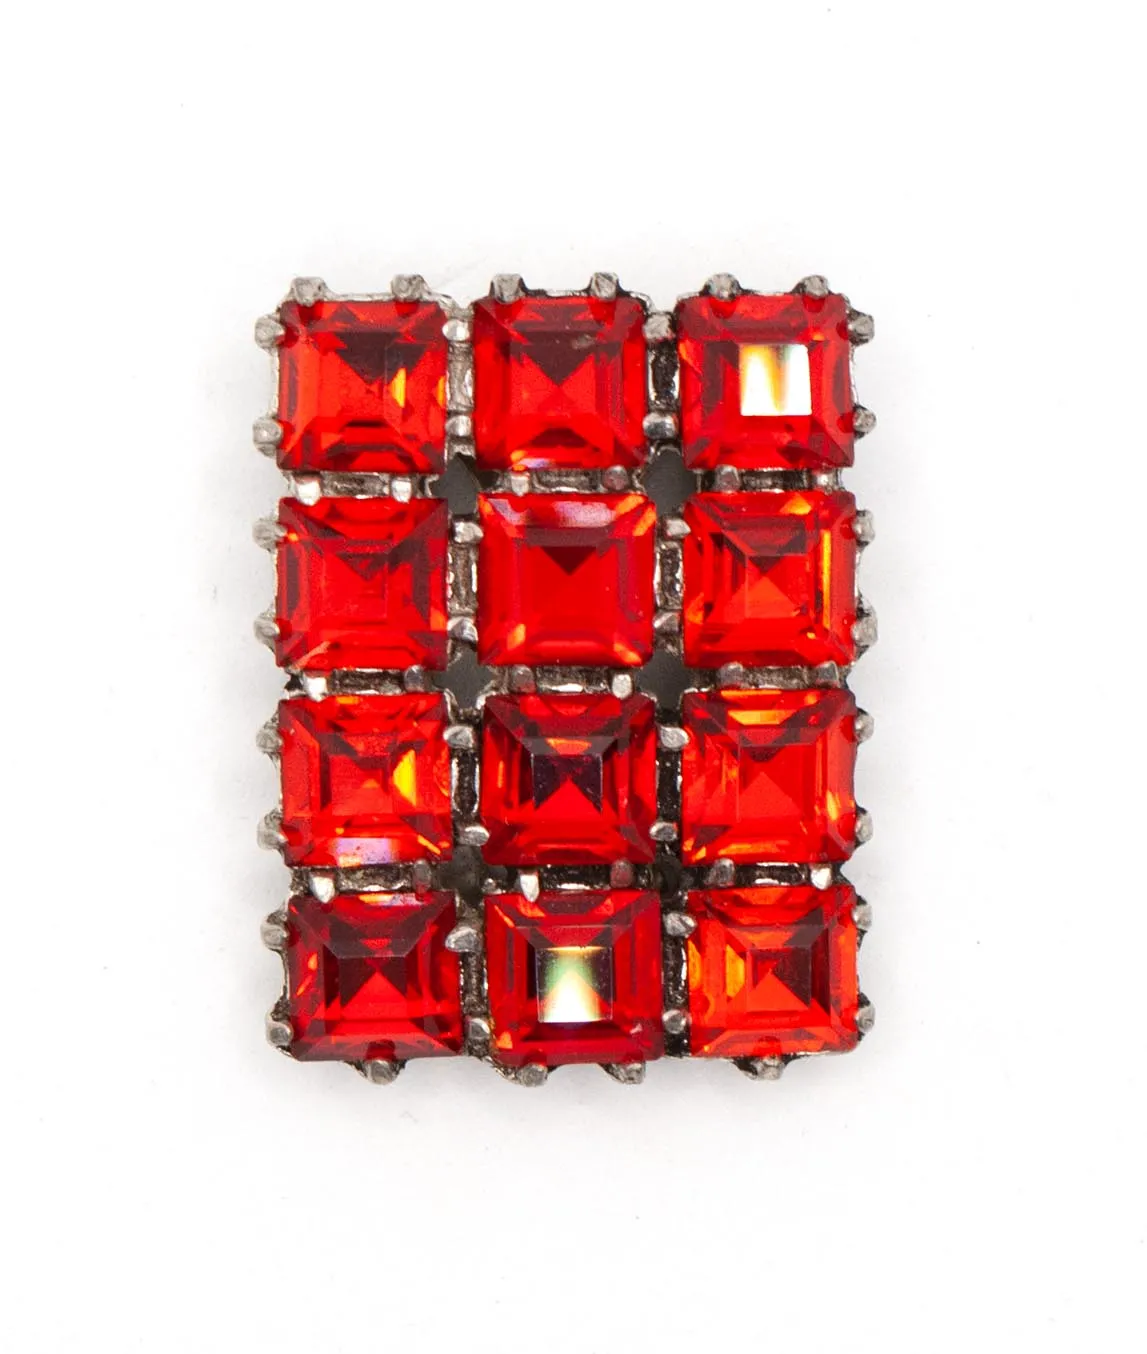 Rectangular dress clip with bright red square crystals